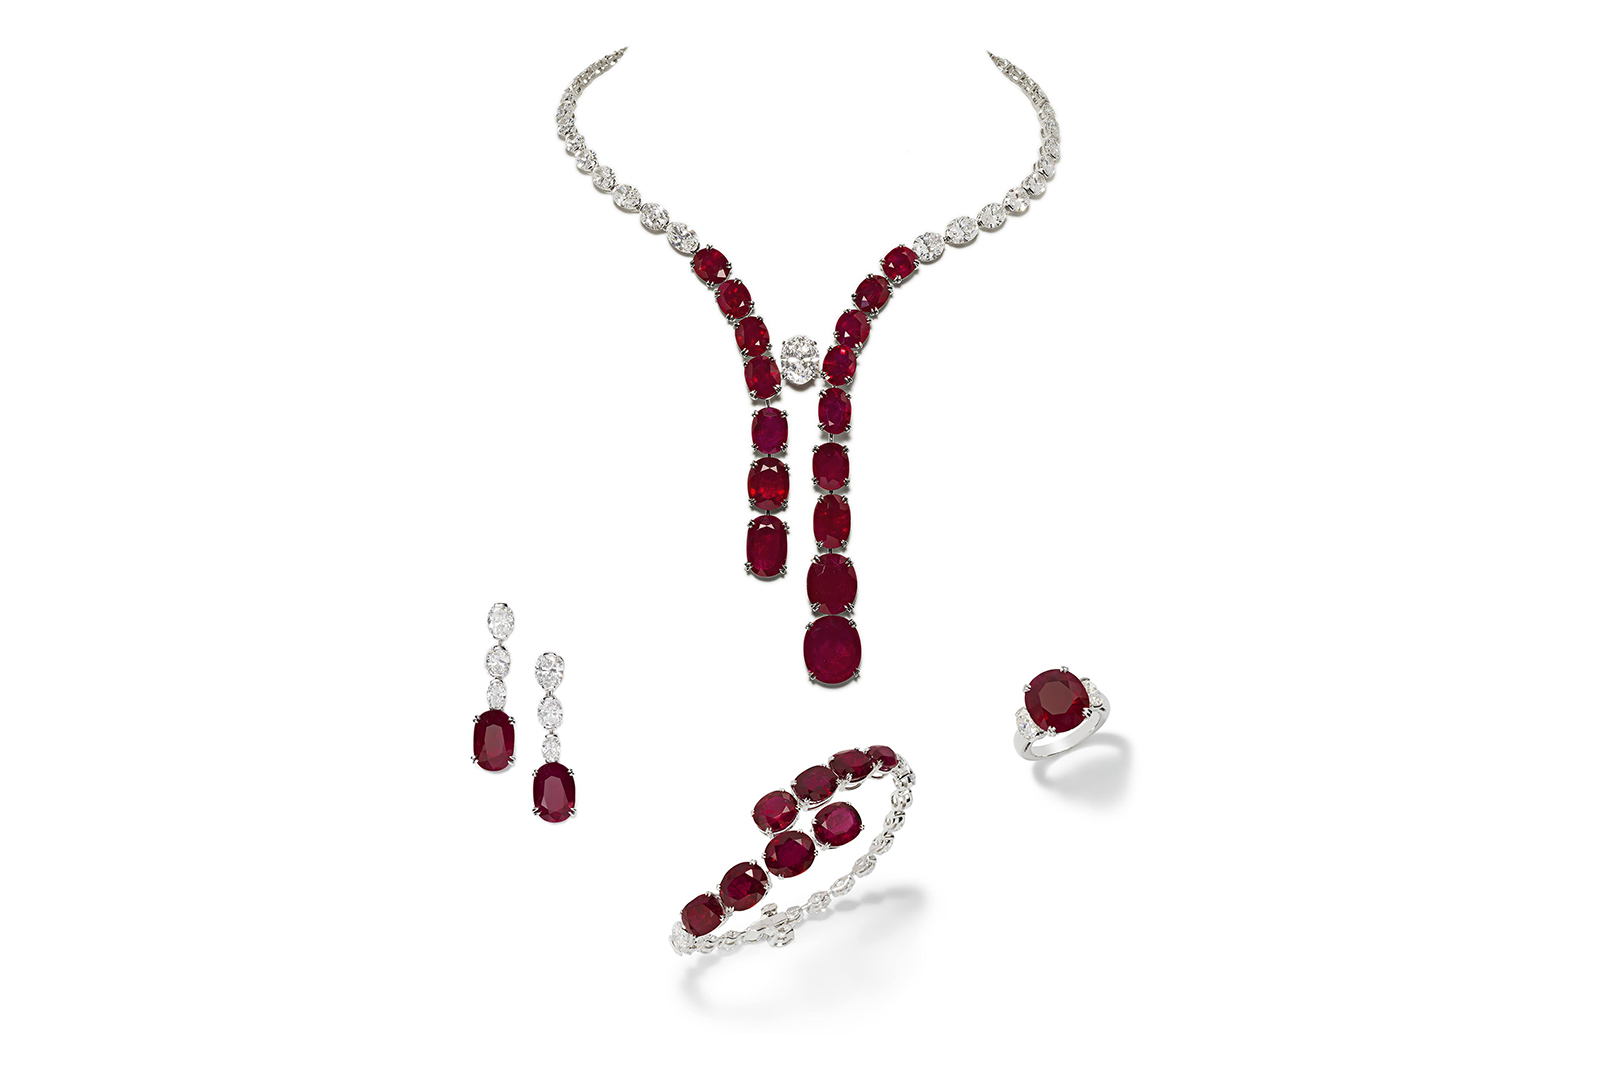 This one-of-a-kind set by Jahan is a masterpiece that contrasts the rich beauty of rubies with the purity of classic white diamonds